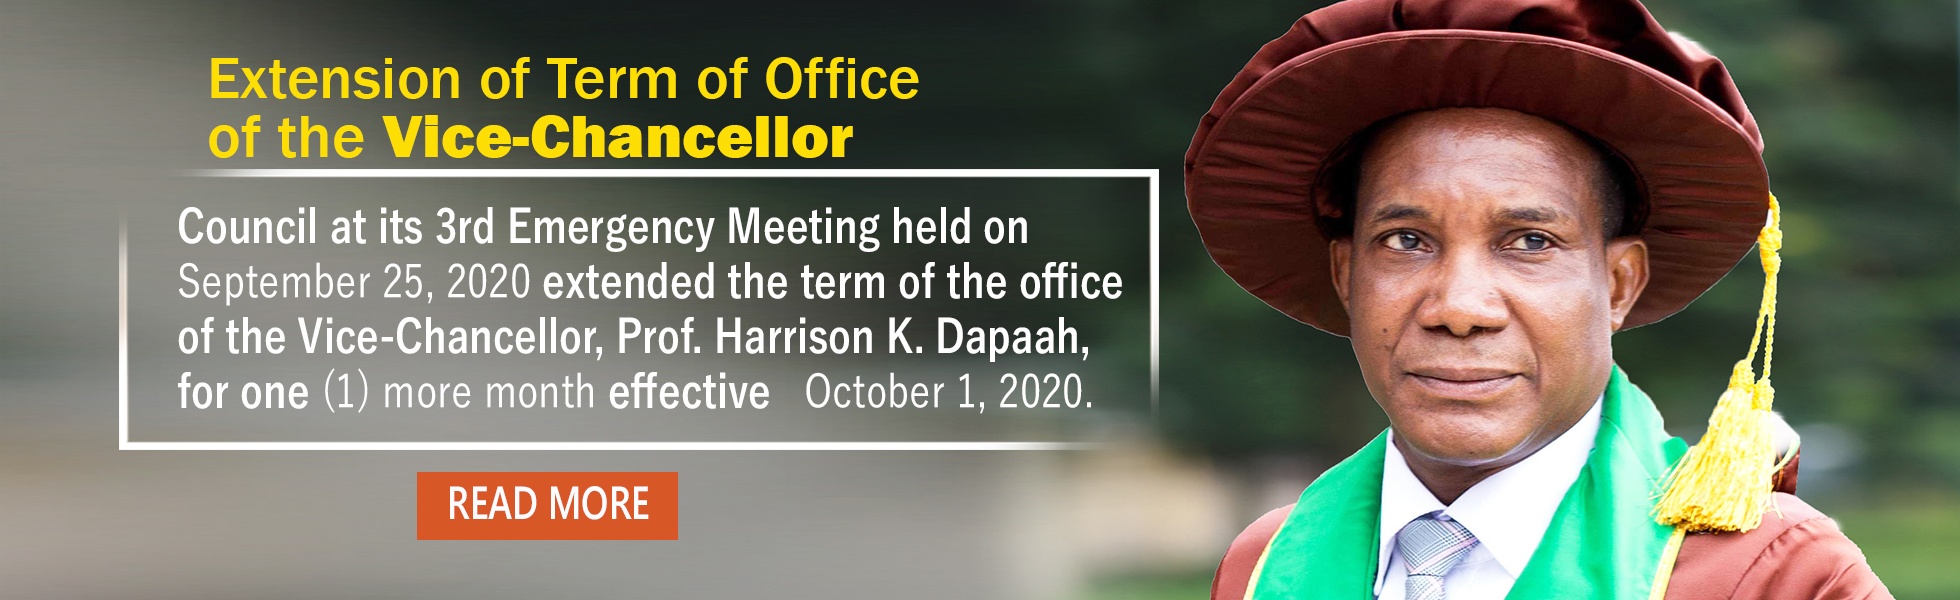 TERM OF OFFICE OF THE VICE-CHANCELLOR HAS BEEN EXTENDED